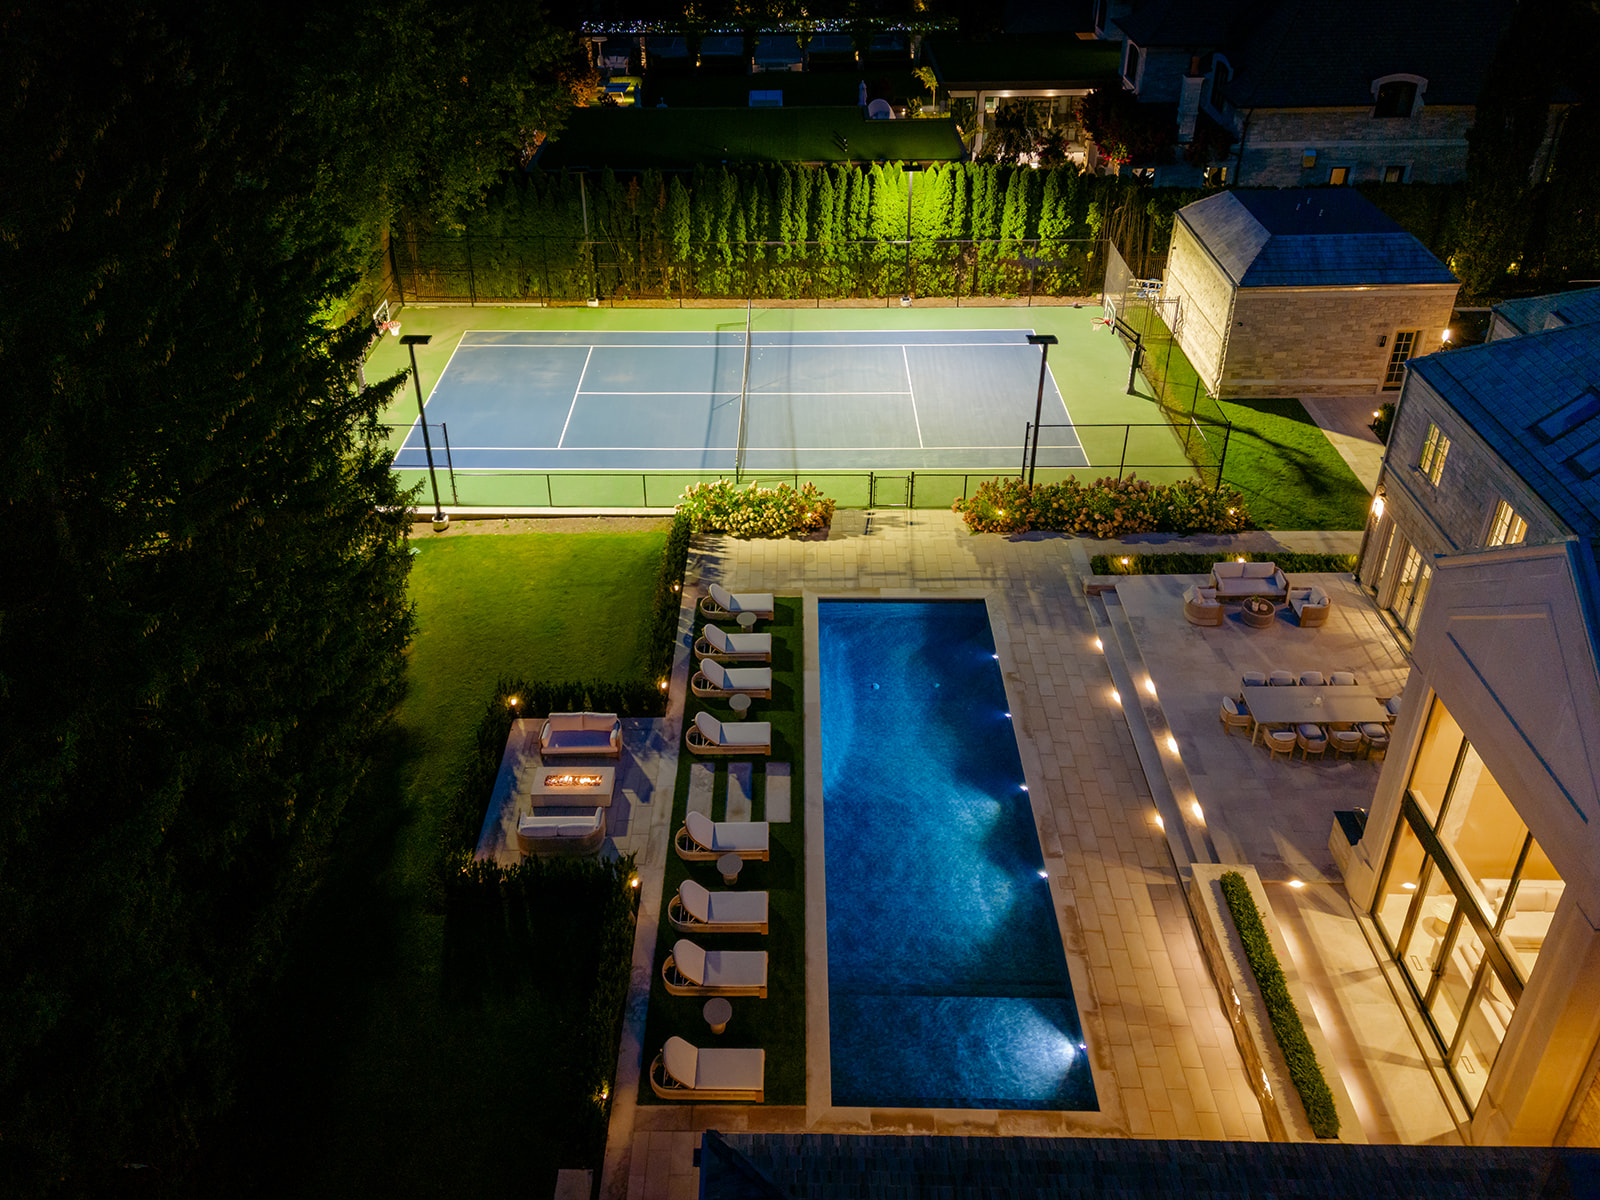 A done-shot of the backyard with the inground pool and tennis court lit up.